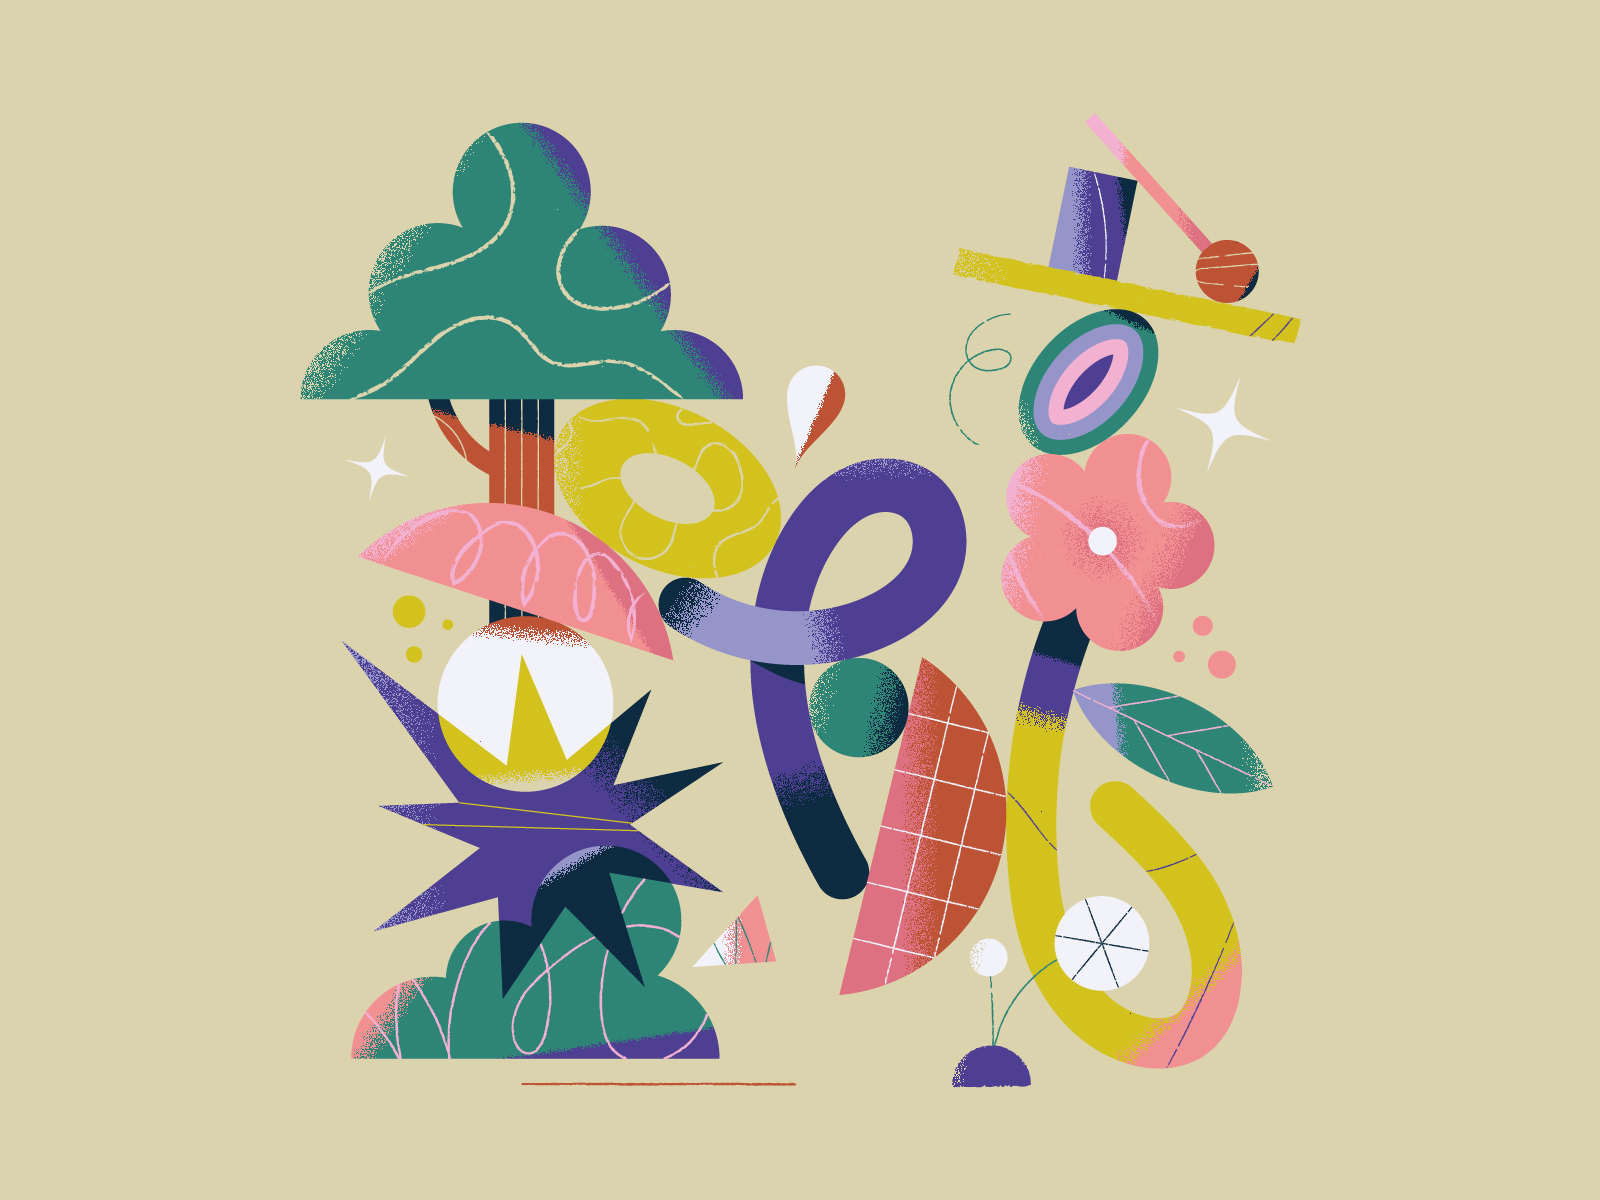 Letter N - 36 days of type 2022 abstract artwork balance colors design exploration fun geometry happy illustration leo alexandre letter n plants pop shapes tree type vector